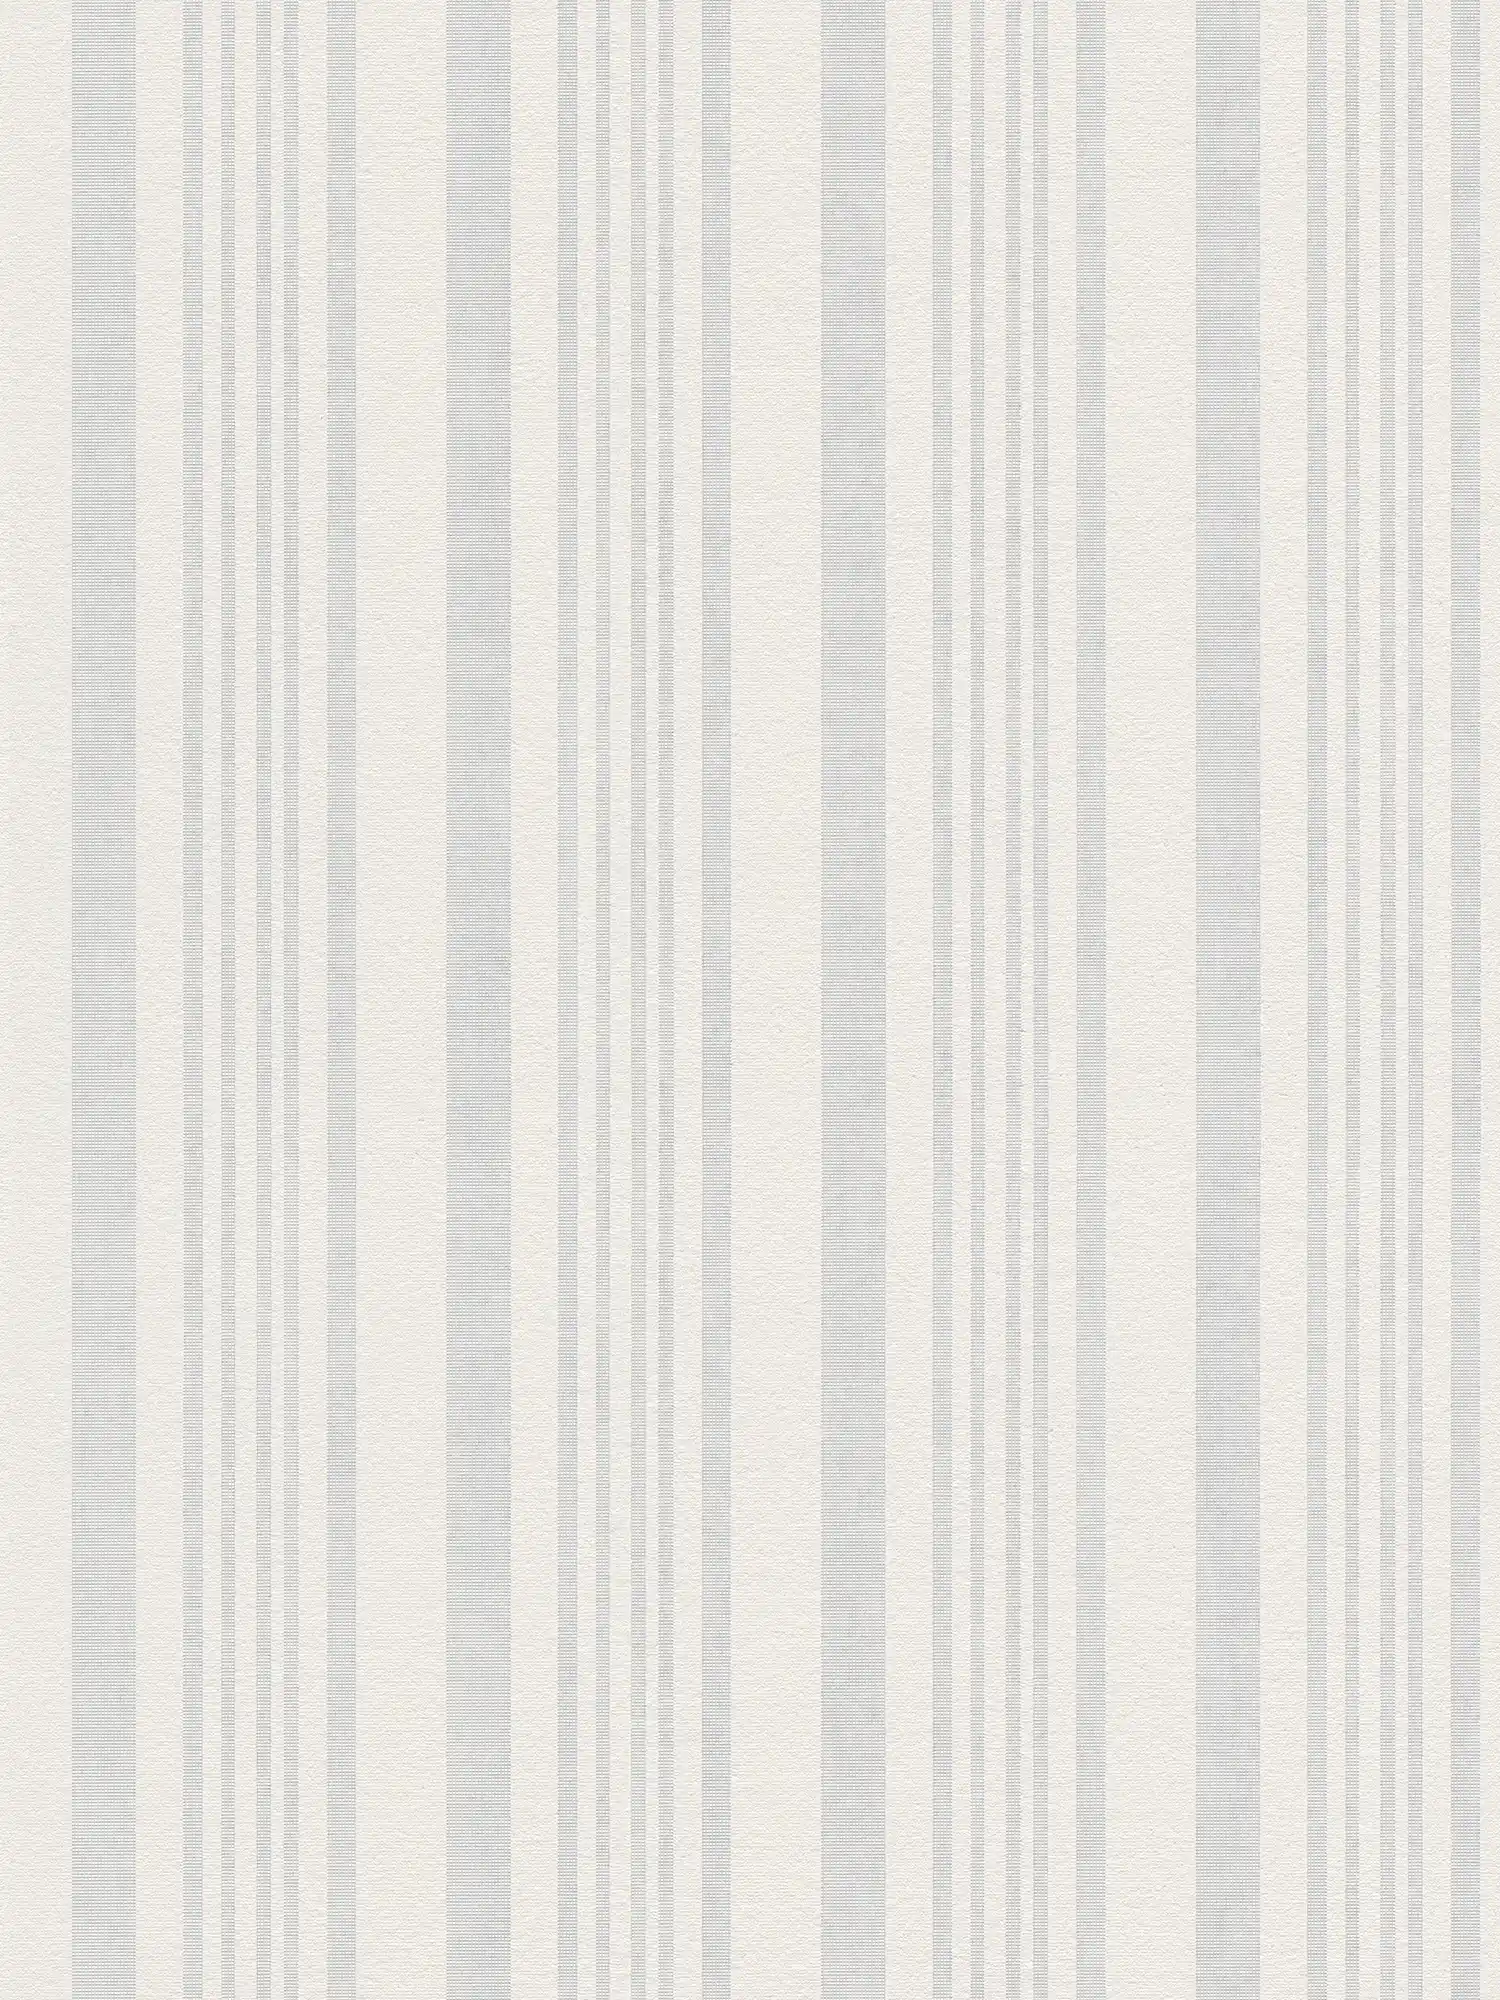 Stripes wallpaper paintable with texture pattern
